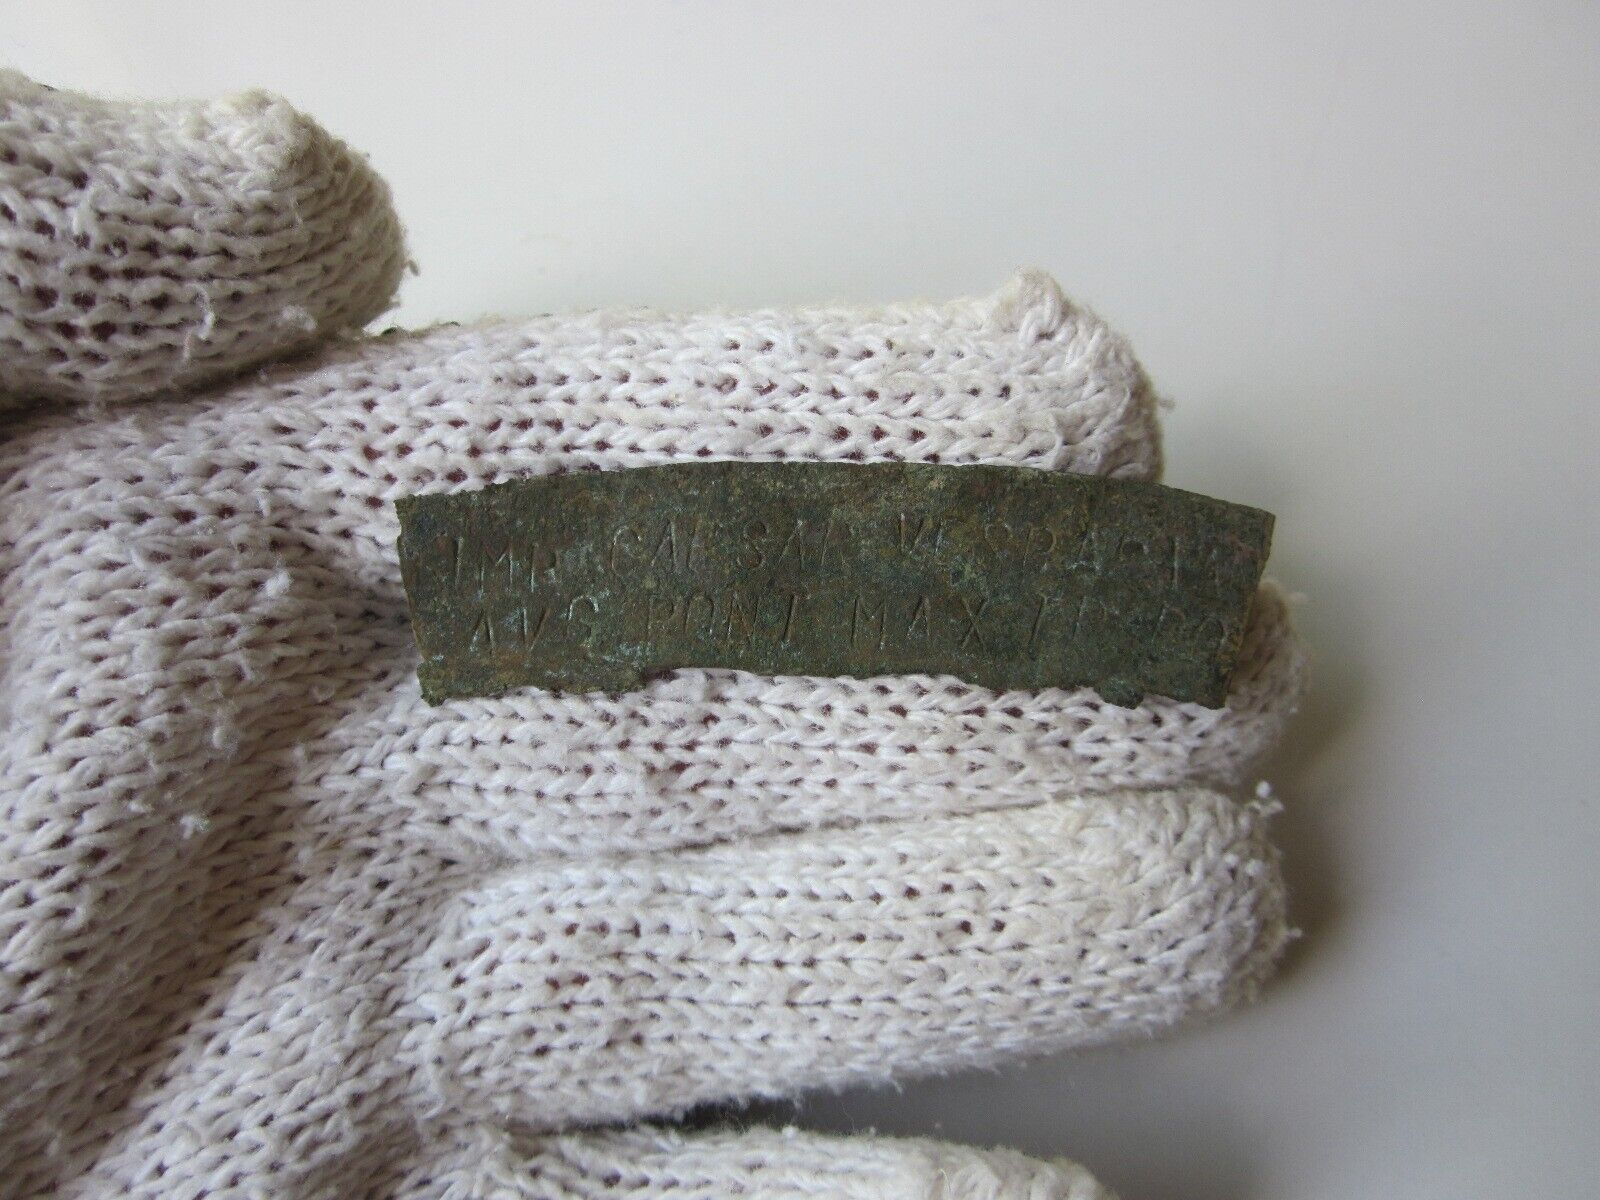 unique ancient Roman bronze MILITARY DIPLOMA I - II AD / part. (3) Uncleaned.